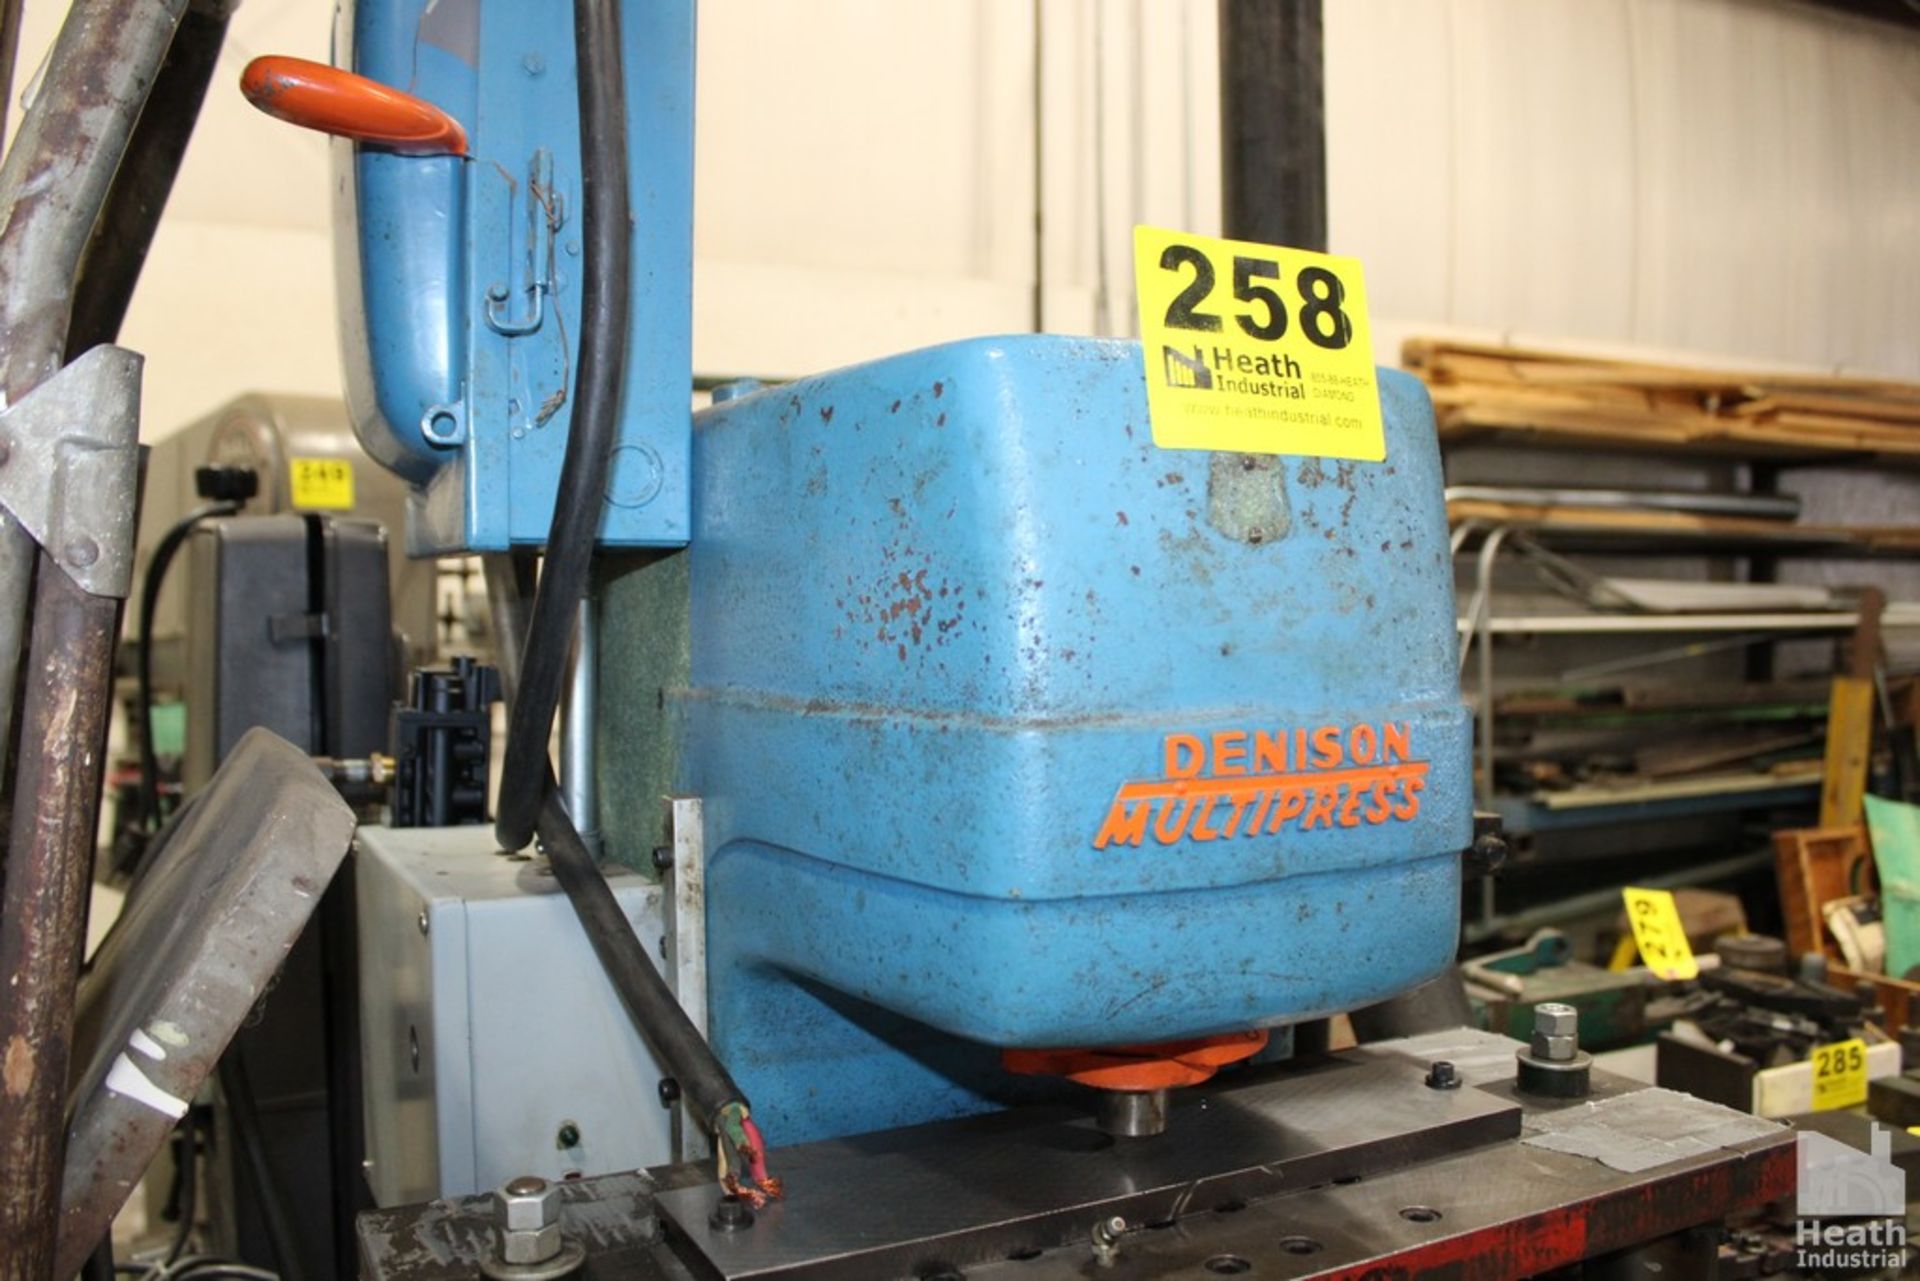 DENISON MULTIPRESS HYDRAULIC PRESS WITH STAND - Image 3 of 5